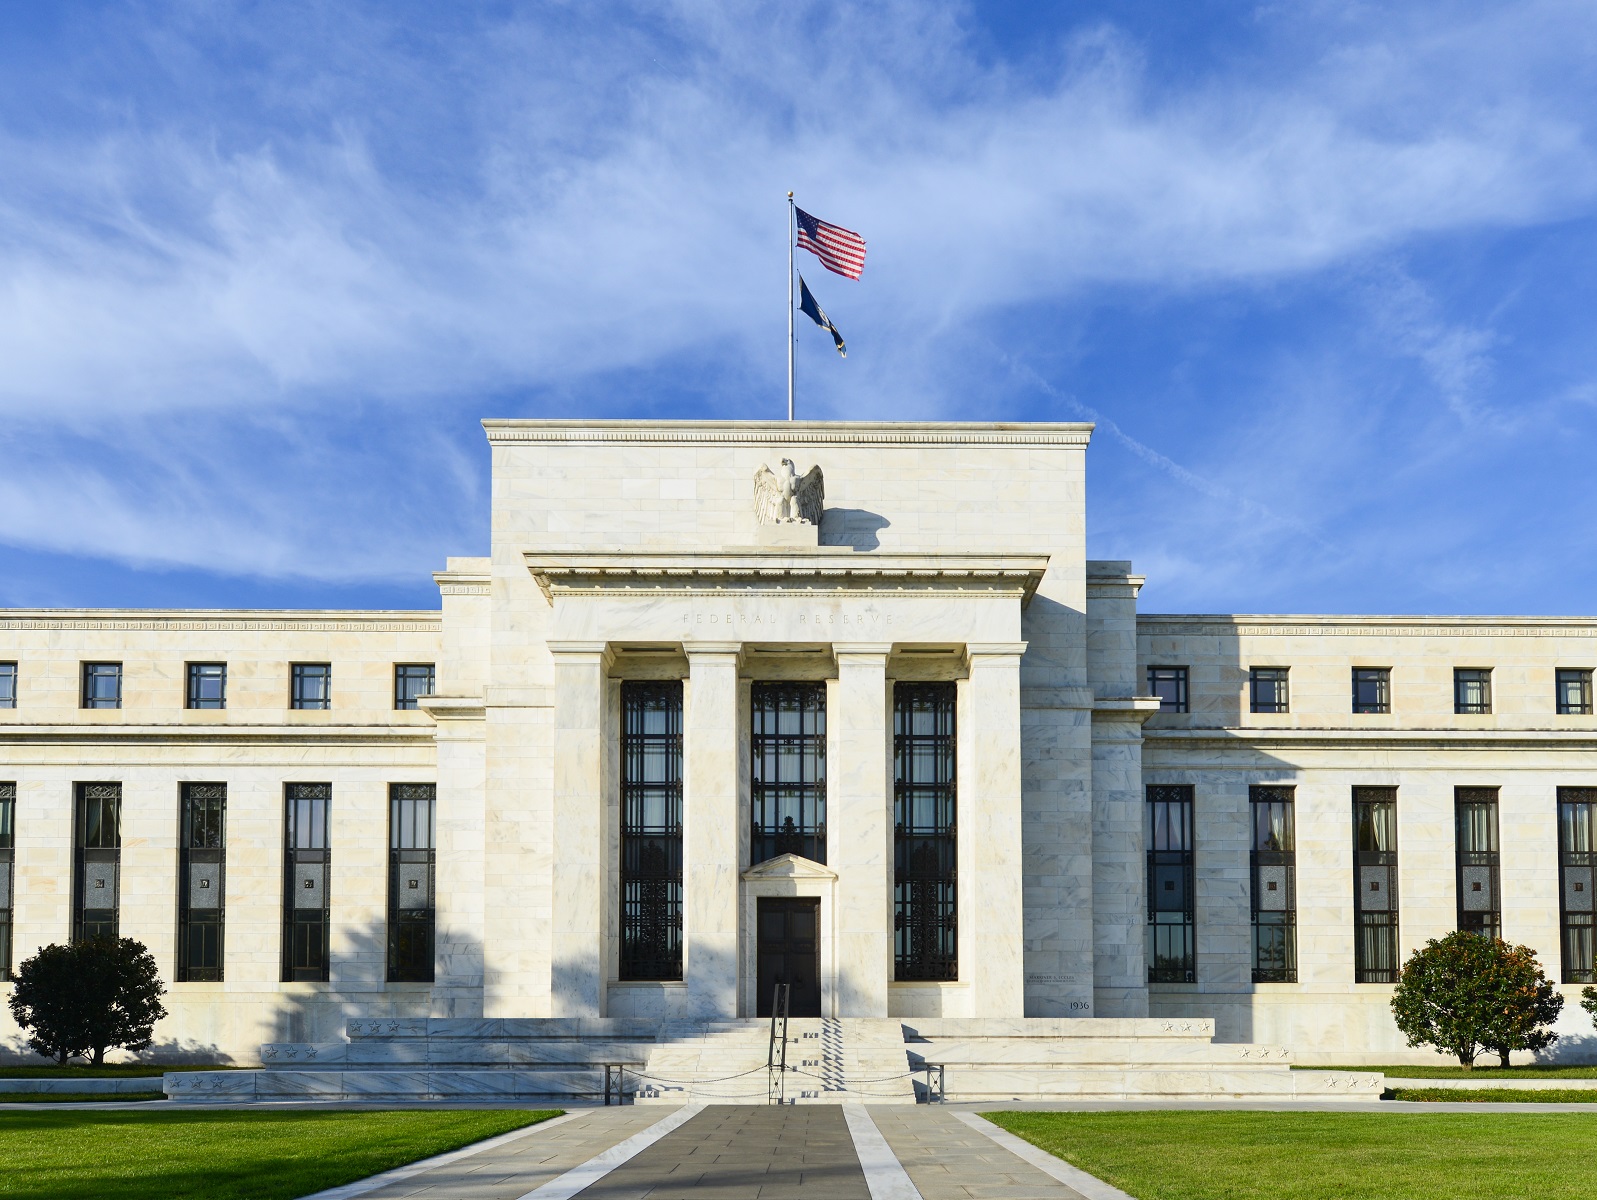 New Hire to Head Digital Currency Research at the US Fed